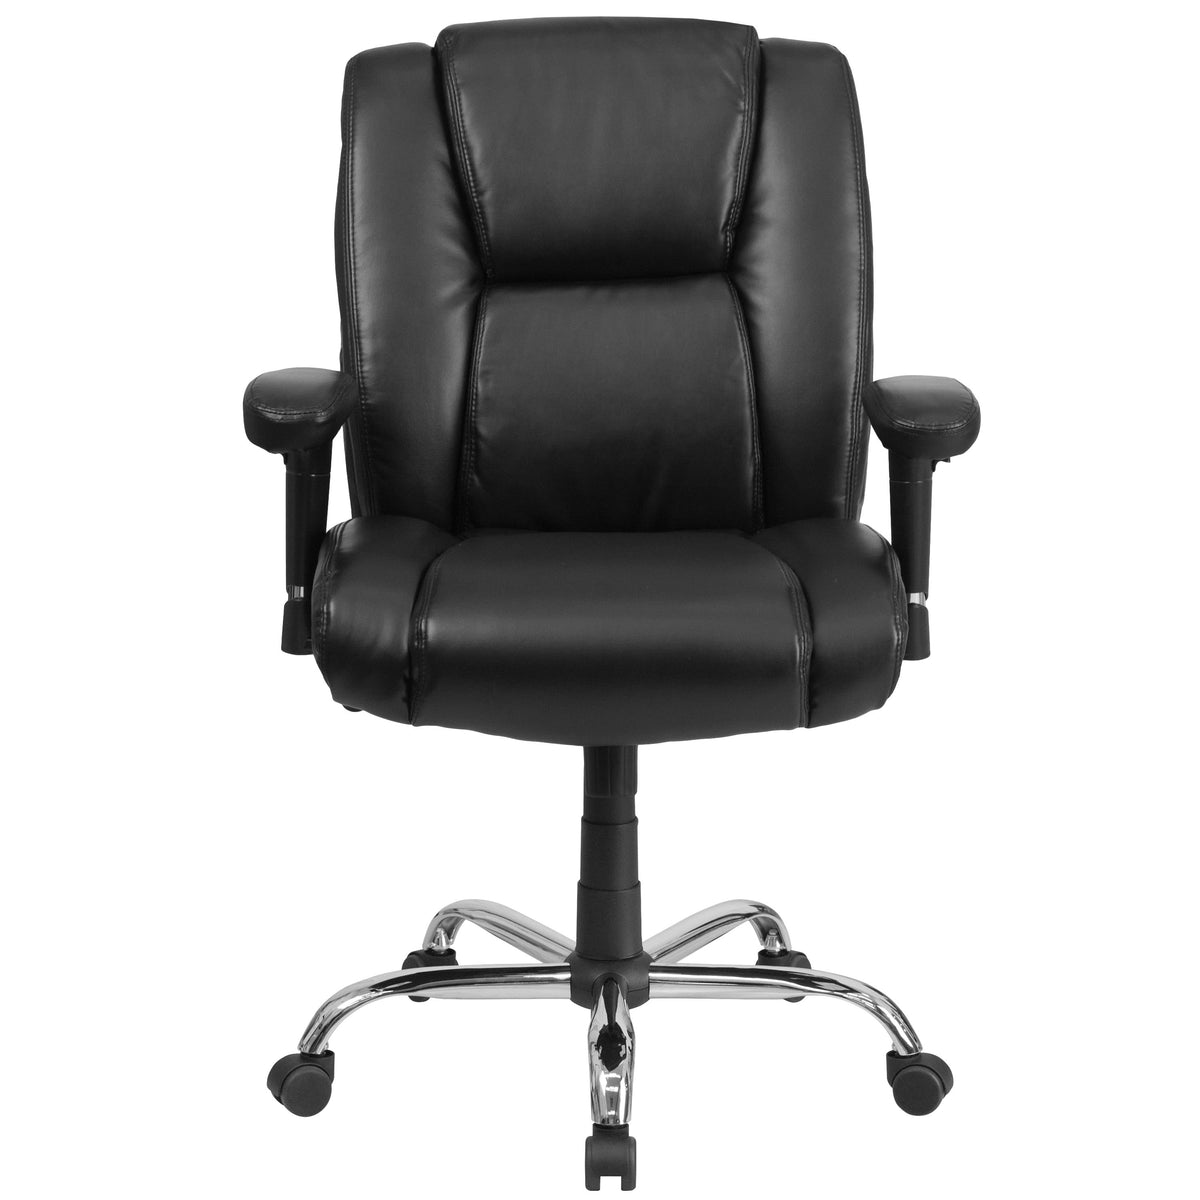 Big & Tall 400 lb. Rated Black LeatherSoft Chair w/Chrome Base & Adjustable Arms